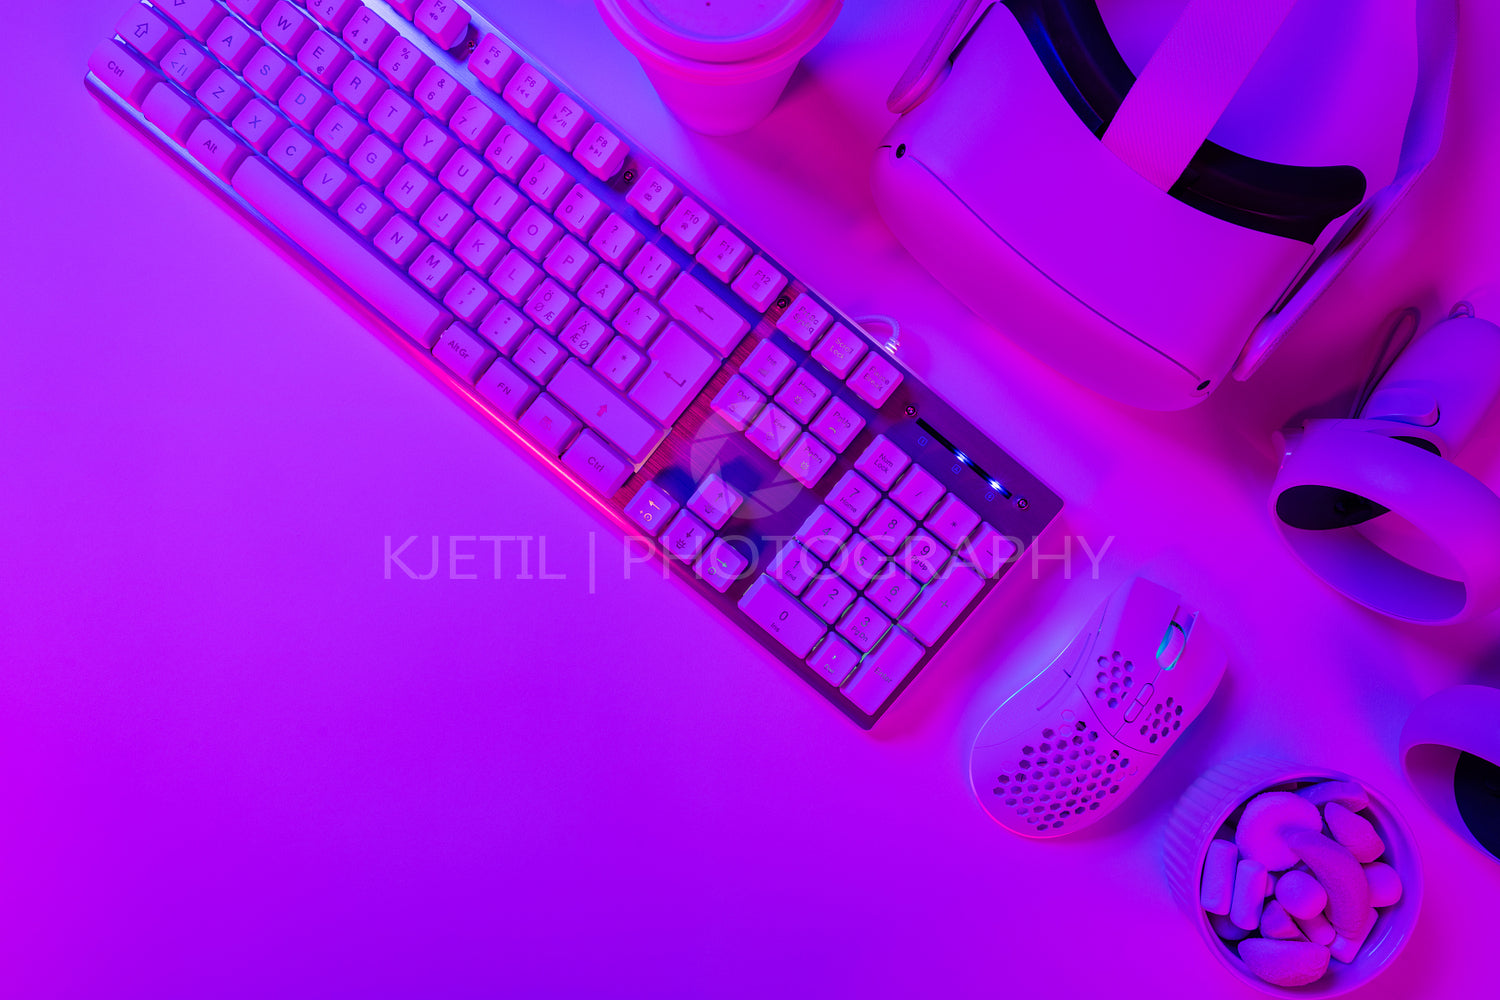 Keyboard with mouse and headphones on desk